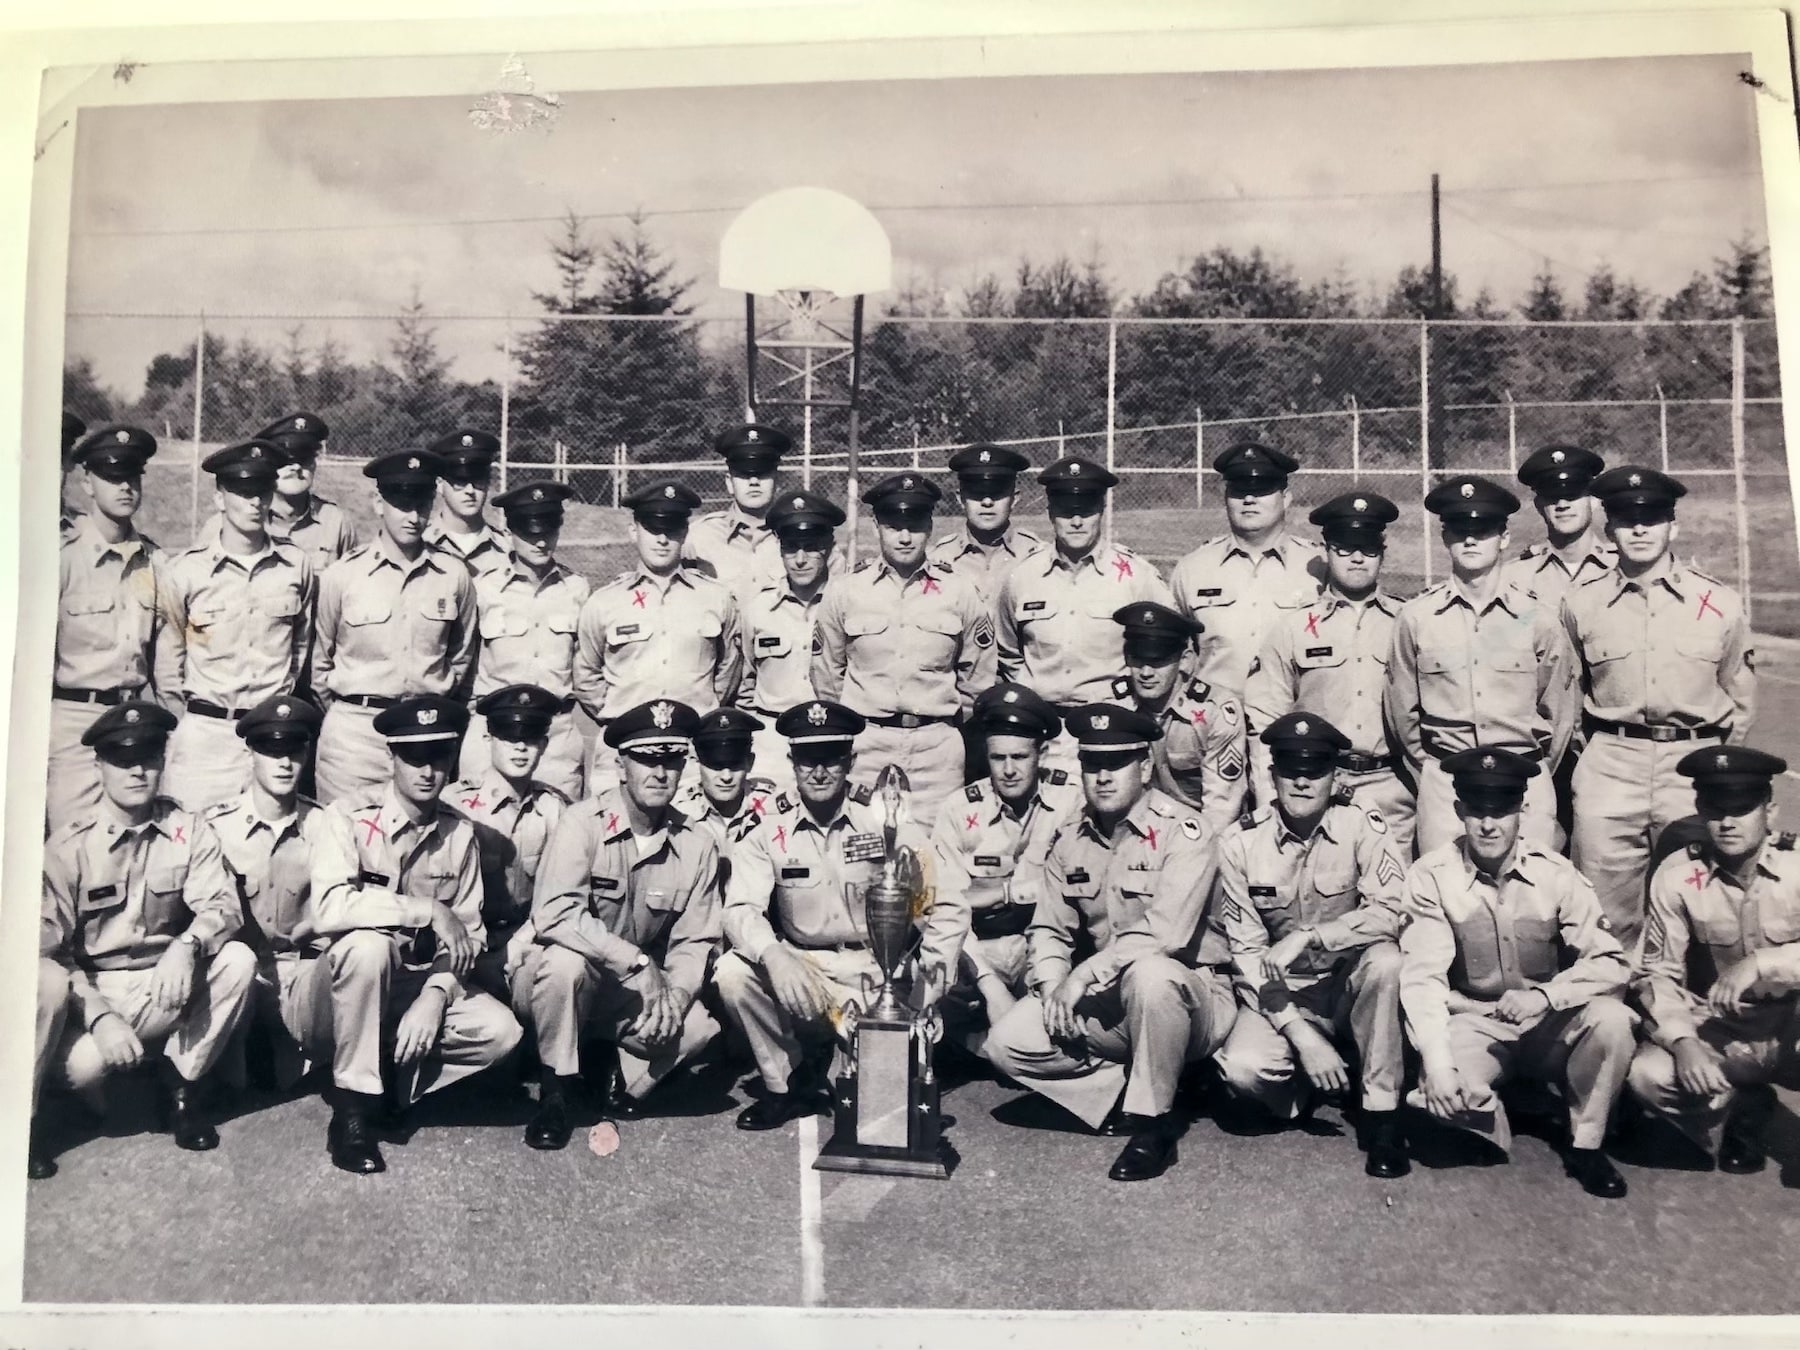 The Olalla Nike team poses with the Commander's Trophy that it won during 1962 firing exercises in New Mexico. Maj. James W. Root is at center, Sgt. Carl Tinker second from left in front and Sgt. Vince Romo 11th from left in back row.